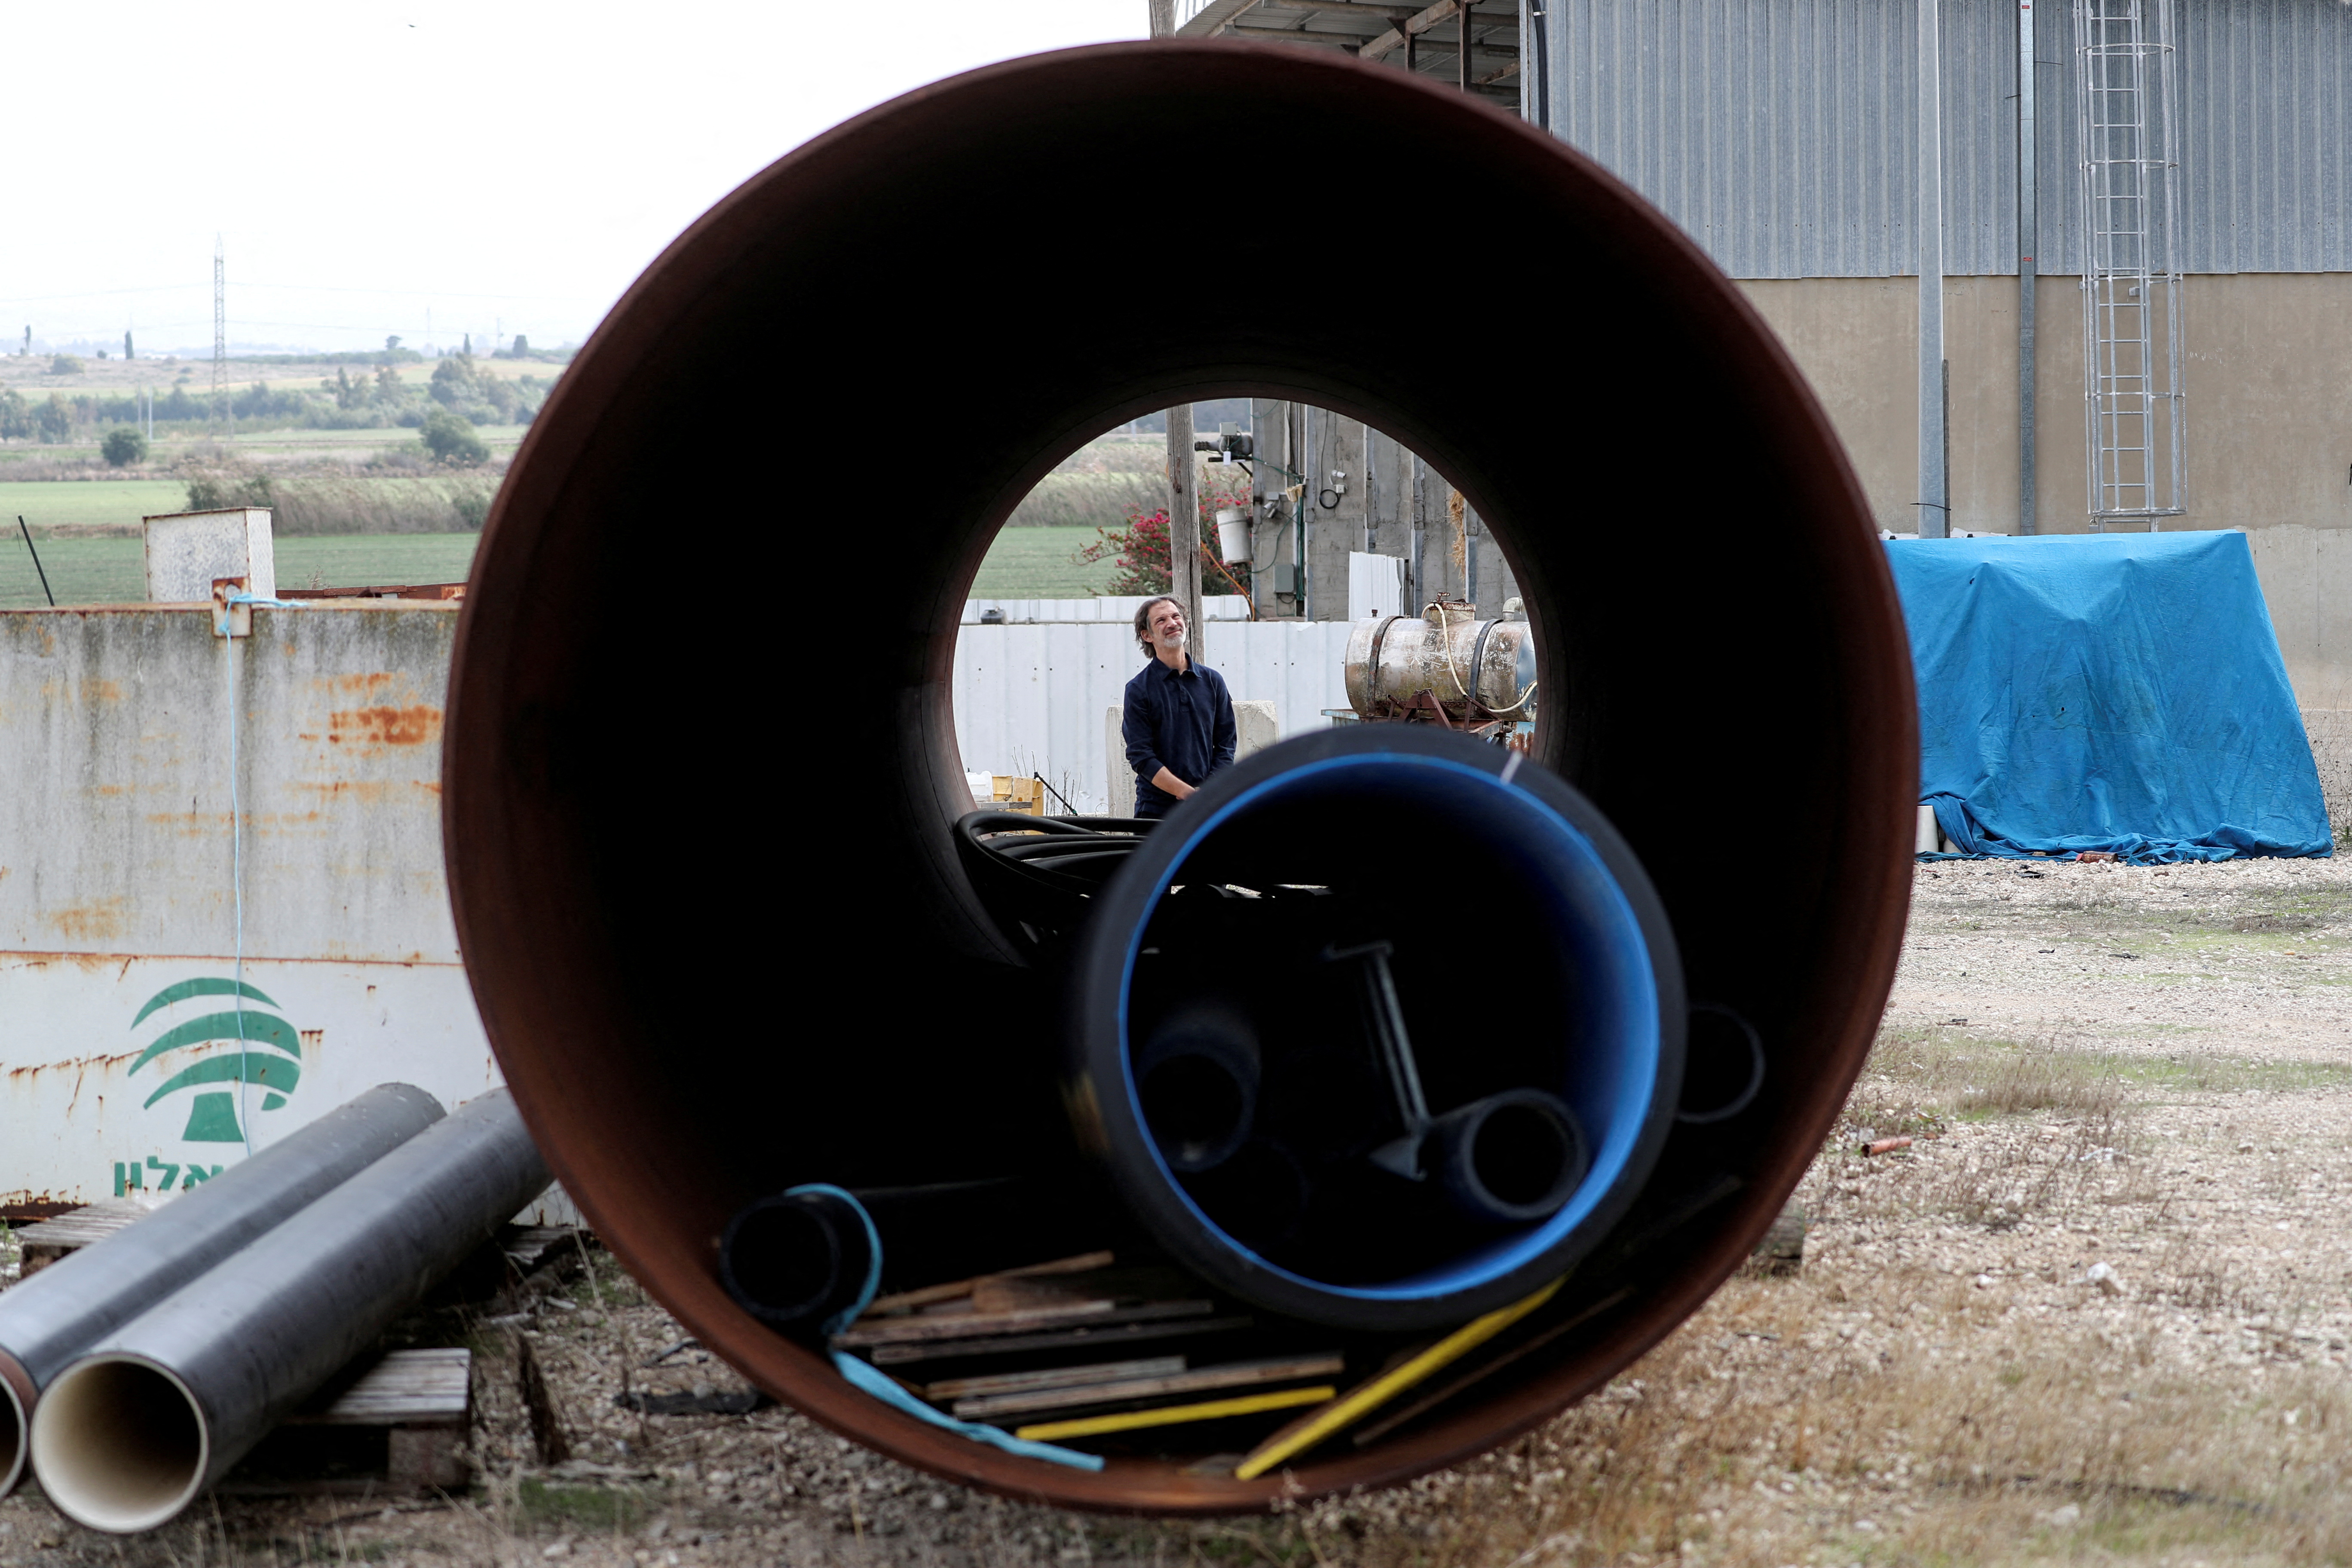 Employee looks on from behind a part of an air storage tank at Augwind's headquarters in Kibbutz Yakum, Israel